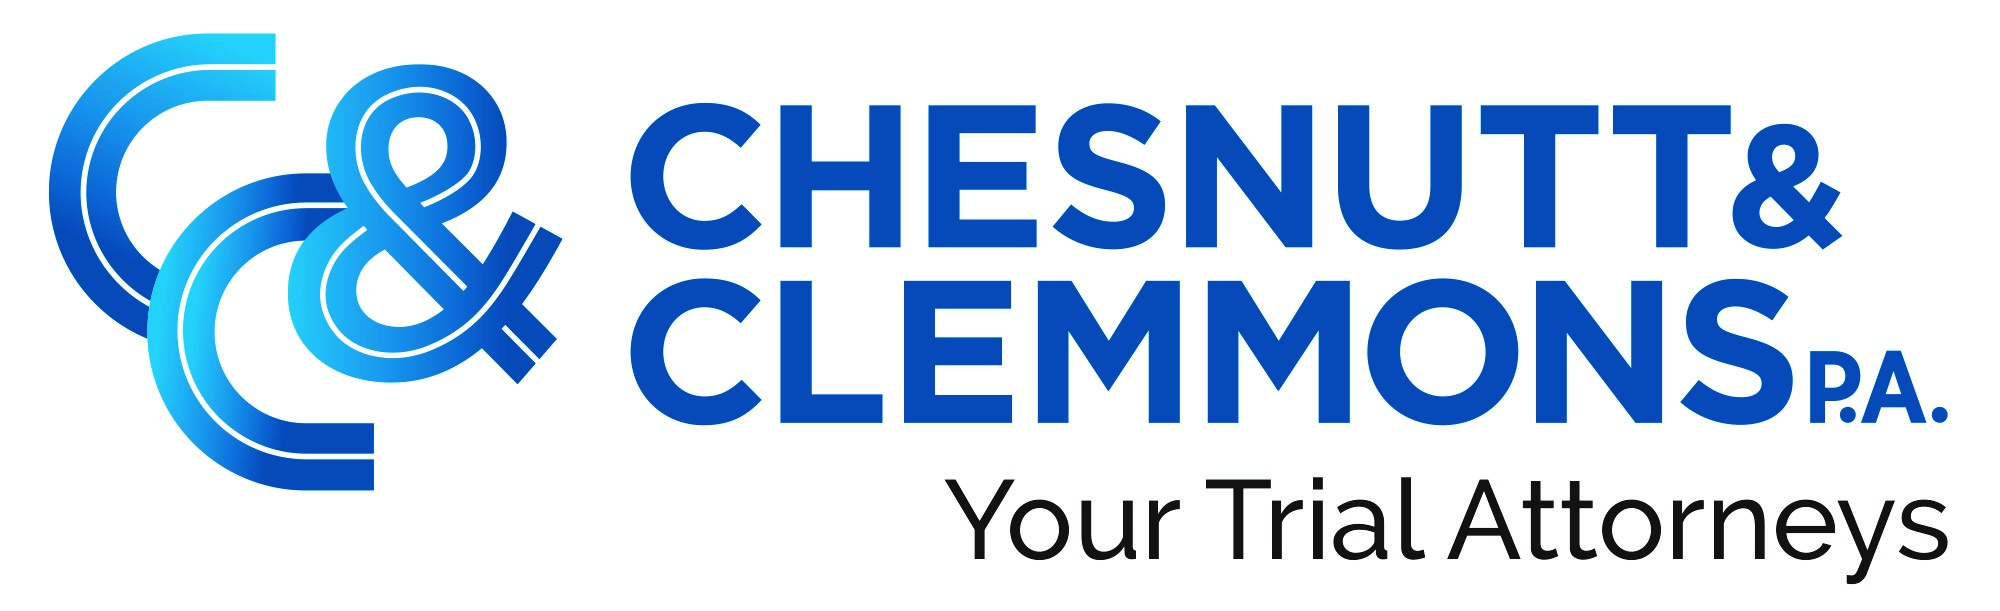 Chestnutt & Clemmons w tag line